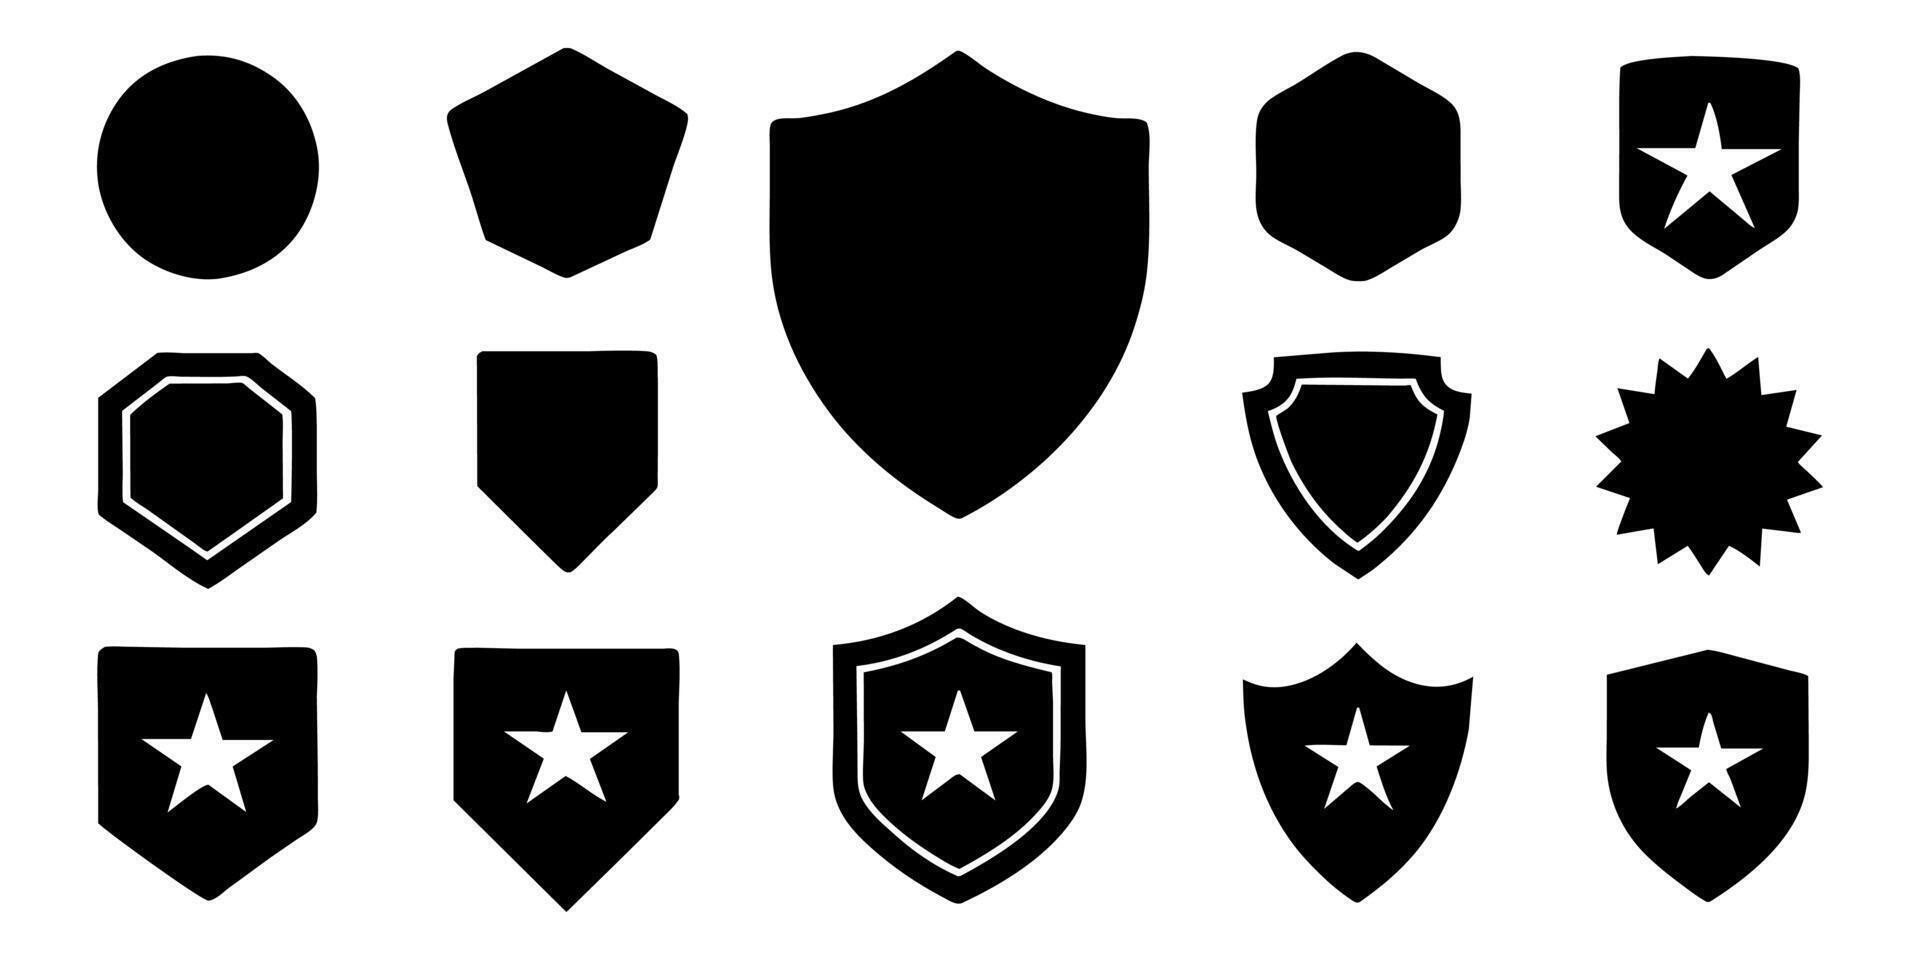 Beautiful set of shields silhouettes. Black badges shape label collection for military, police, soccer and others. vector